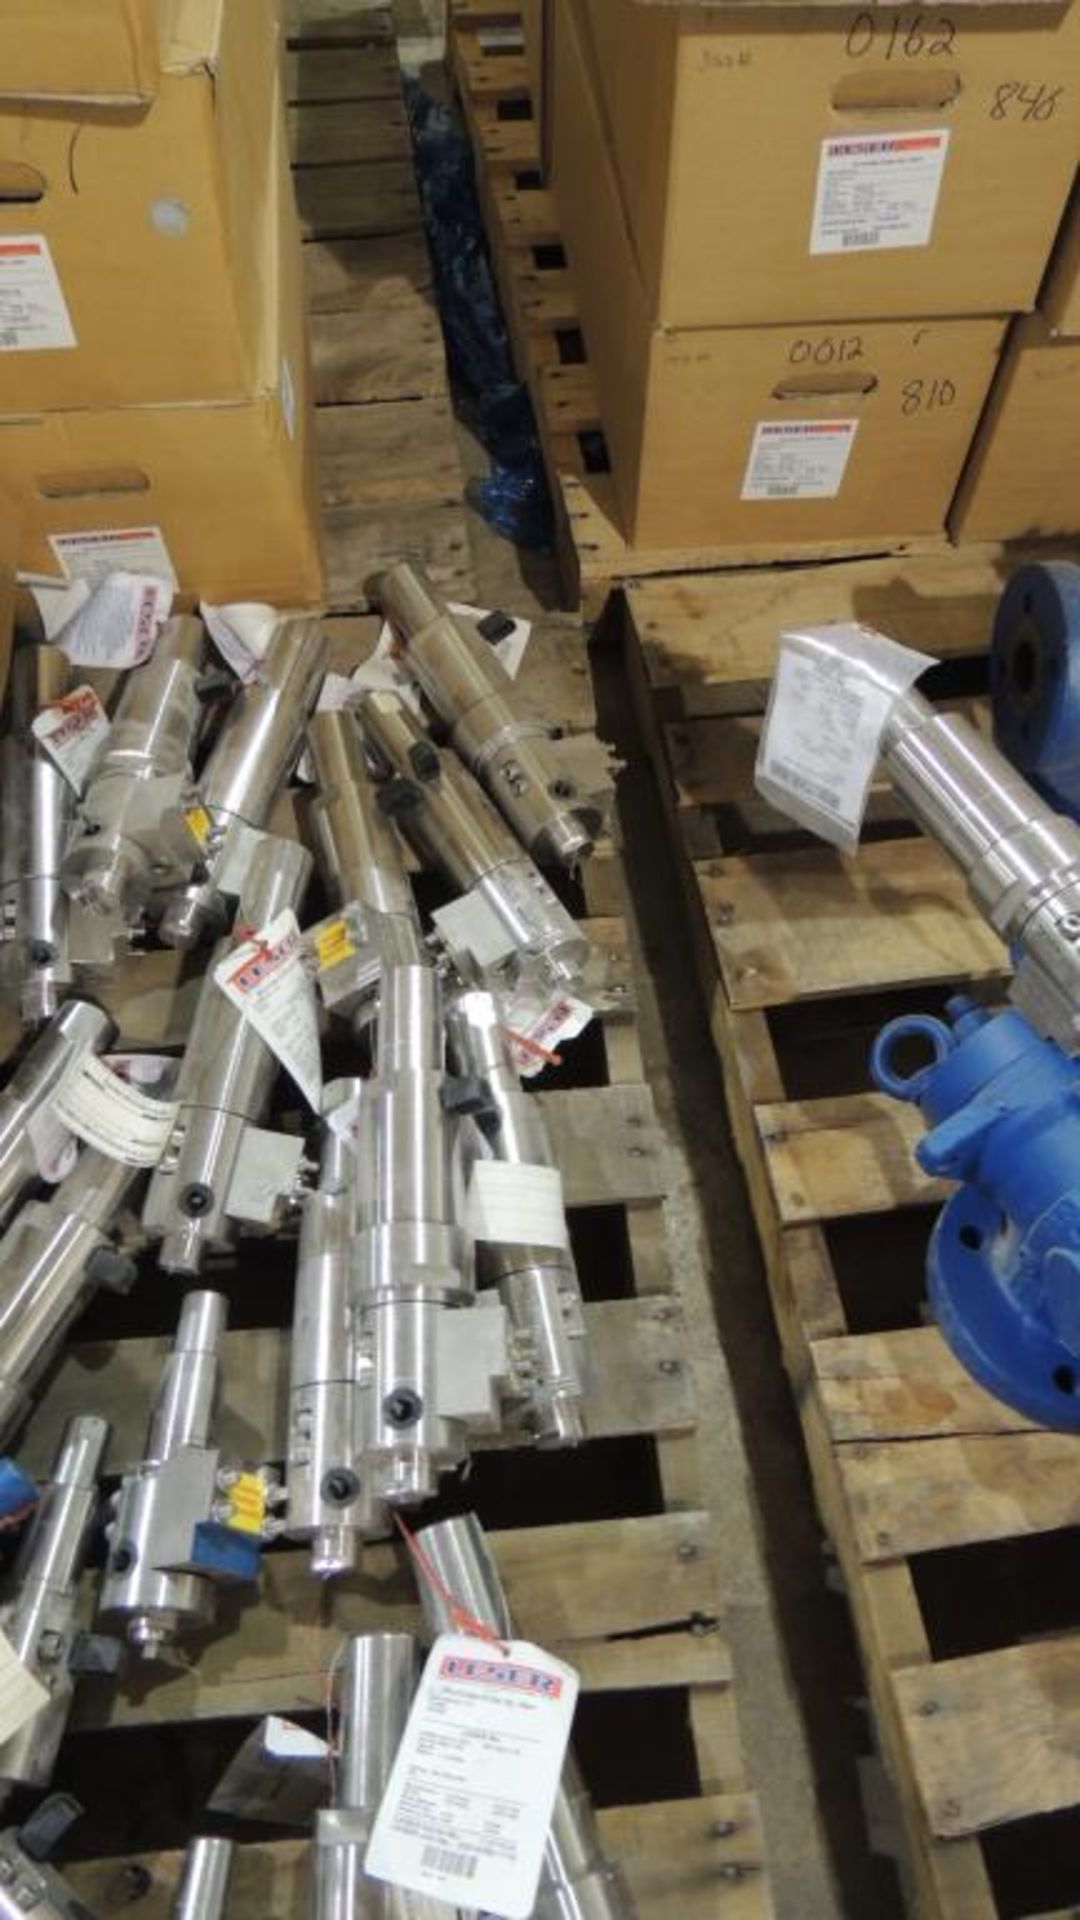 Large Quantity of Leser Relief and Safety Valves, plus Spare Parts Kits - Image 81 of 374